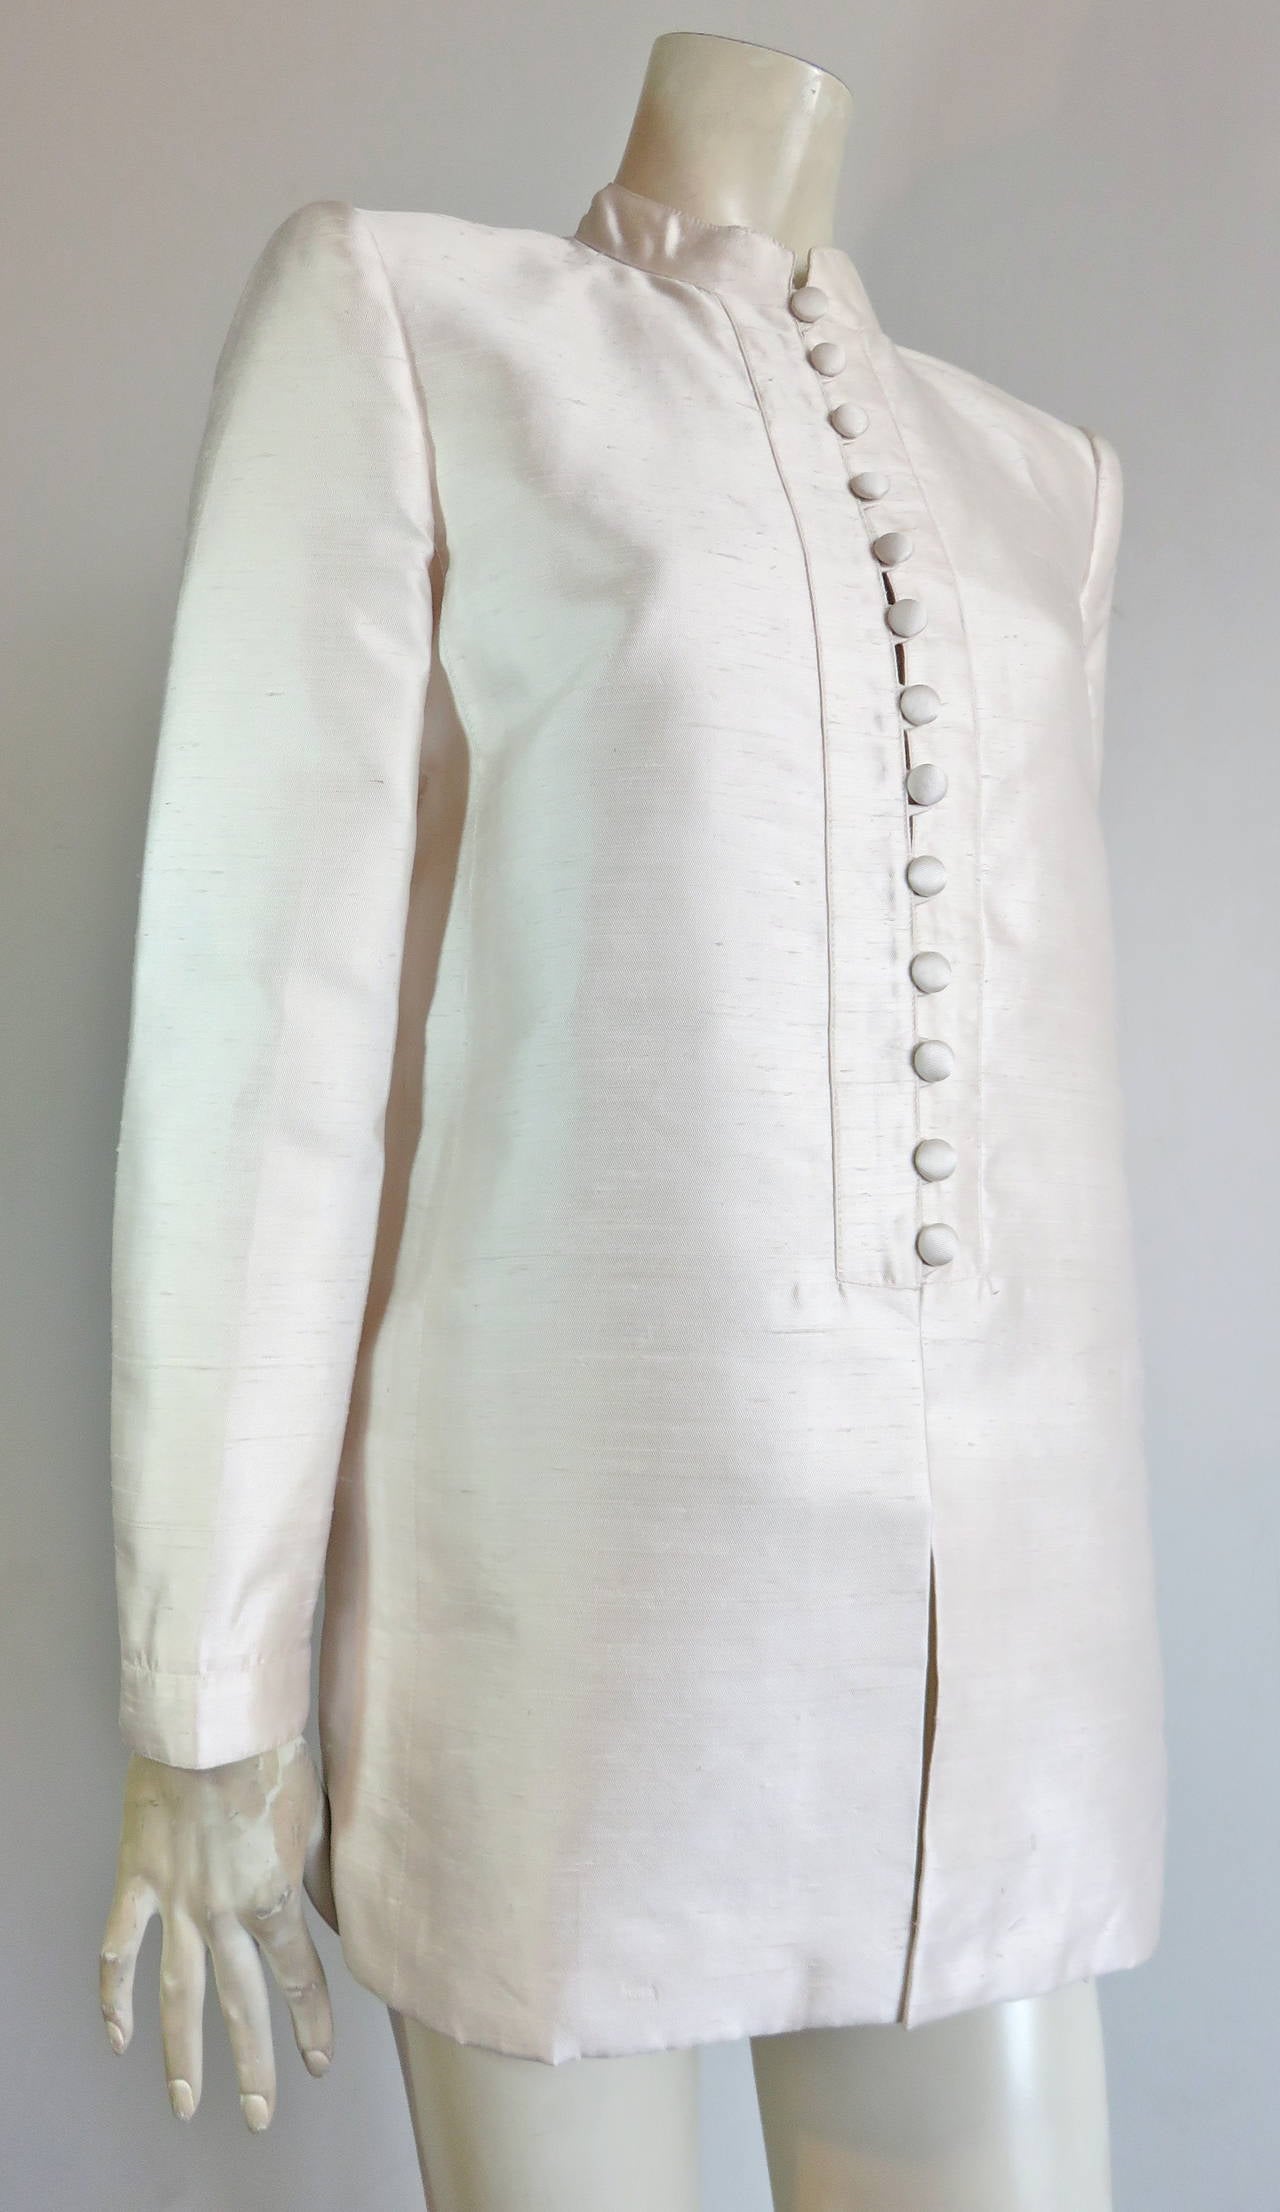 Excellent condition, 1980's OSCAR DE LA RENTA, Silk Shantung, 'Nehru-style' jacket.

Pearlescent, pure silk fabrication with a luxurious sheen.

Banded collar with self-fabric covered button front closures at front opening, and sleeve